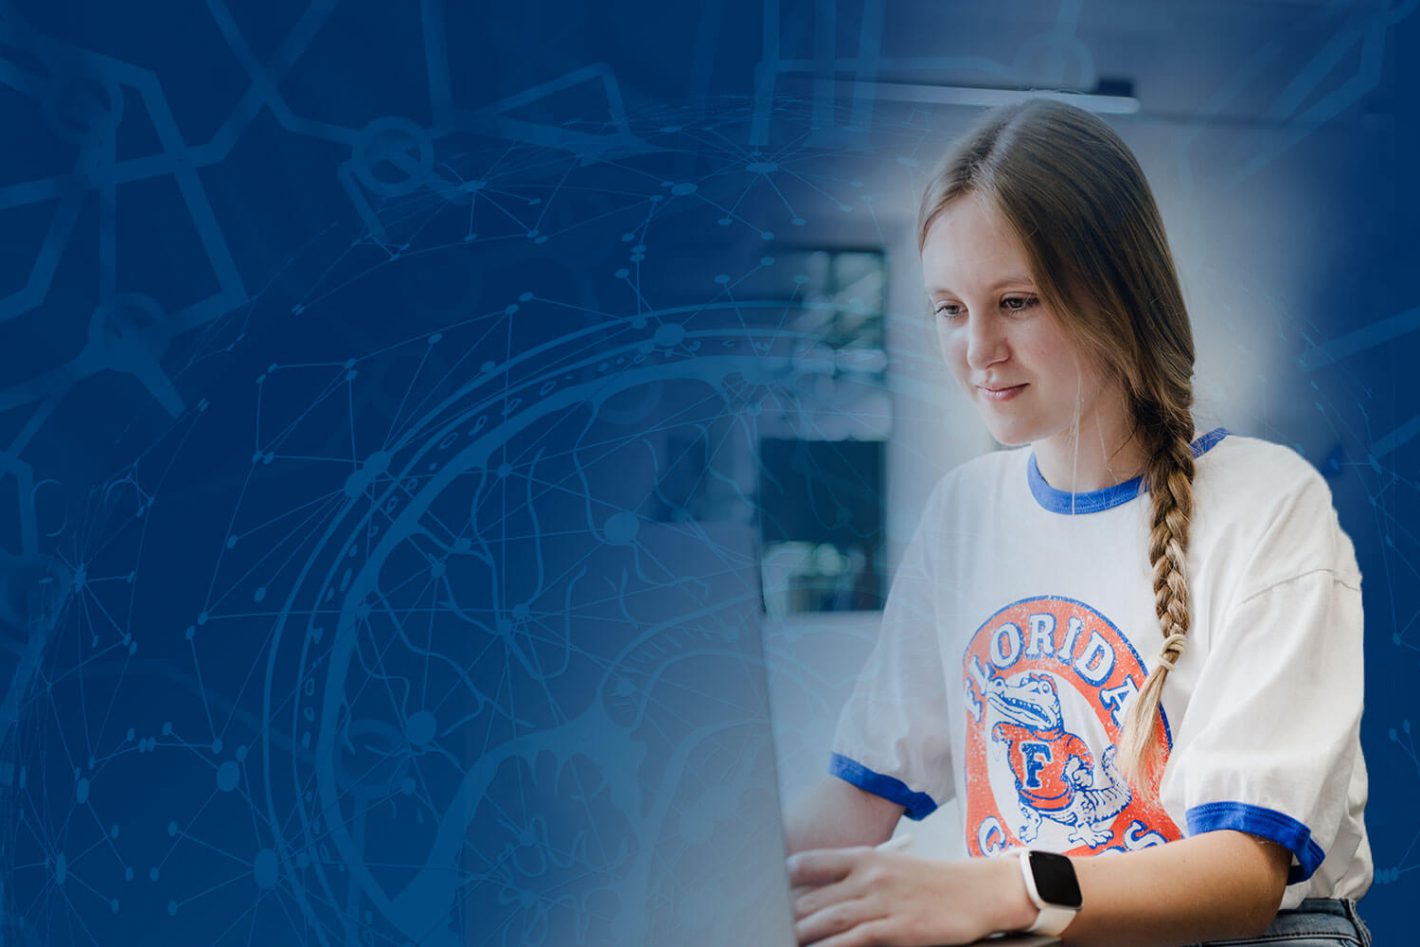 A female student in a UF T-shirt works at a laptop, superimposed over stylized graphics of a human brain, binary code, and electronic circuits.